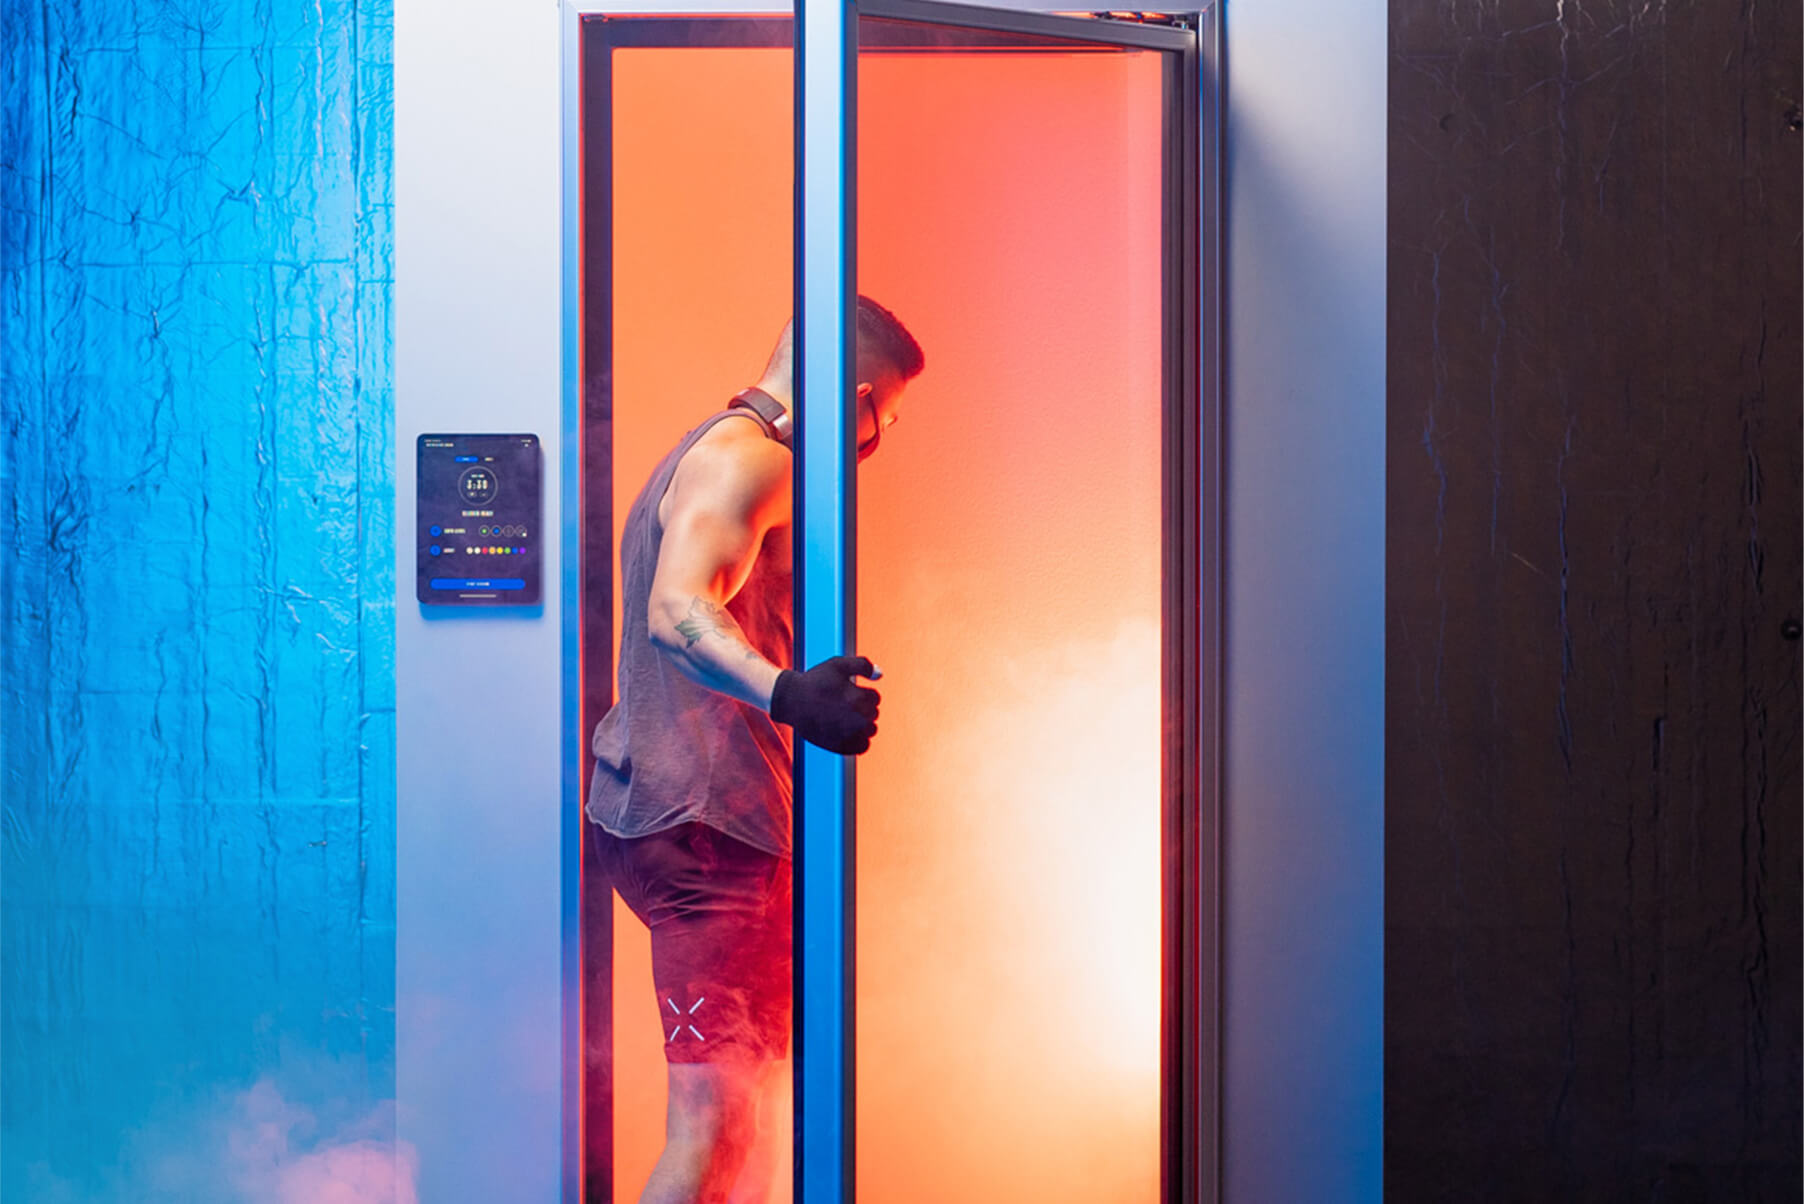 A cryotherapy machine